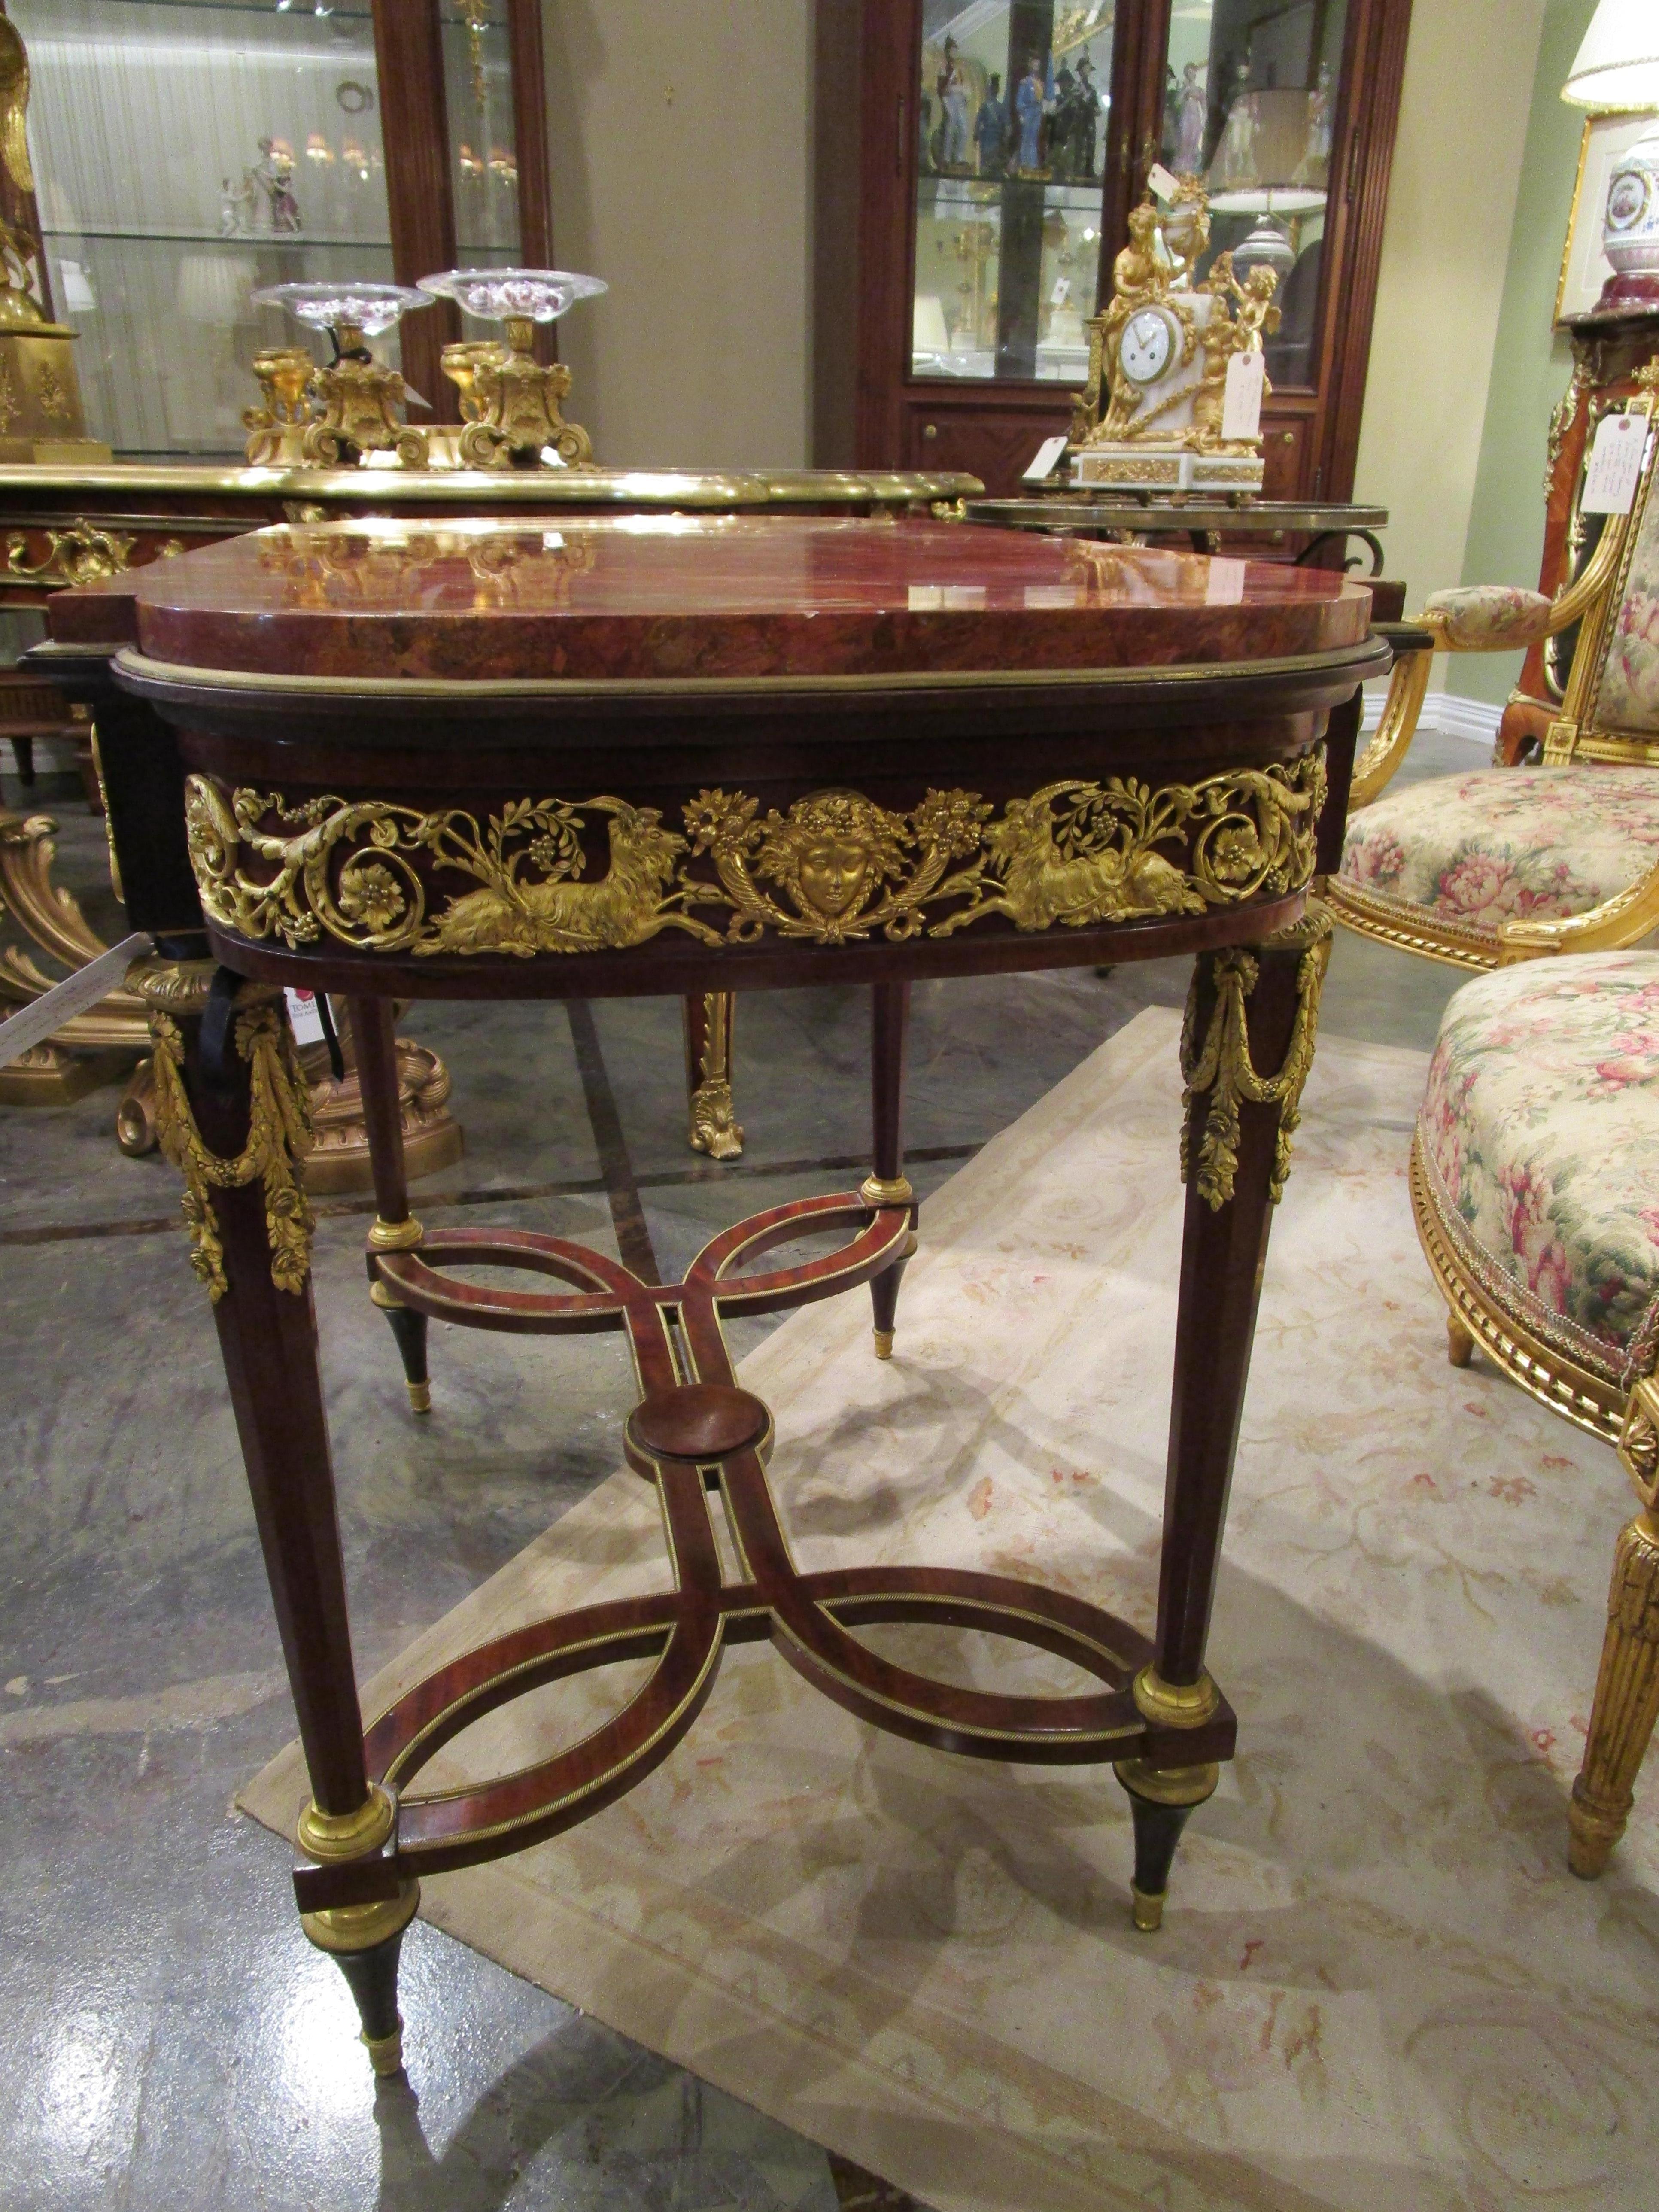 19th Century A fine 19th c French Louis XVI mahogany and gilt bronze mounted centertable